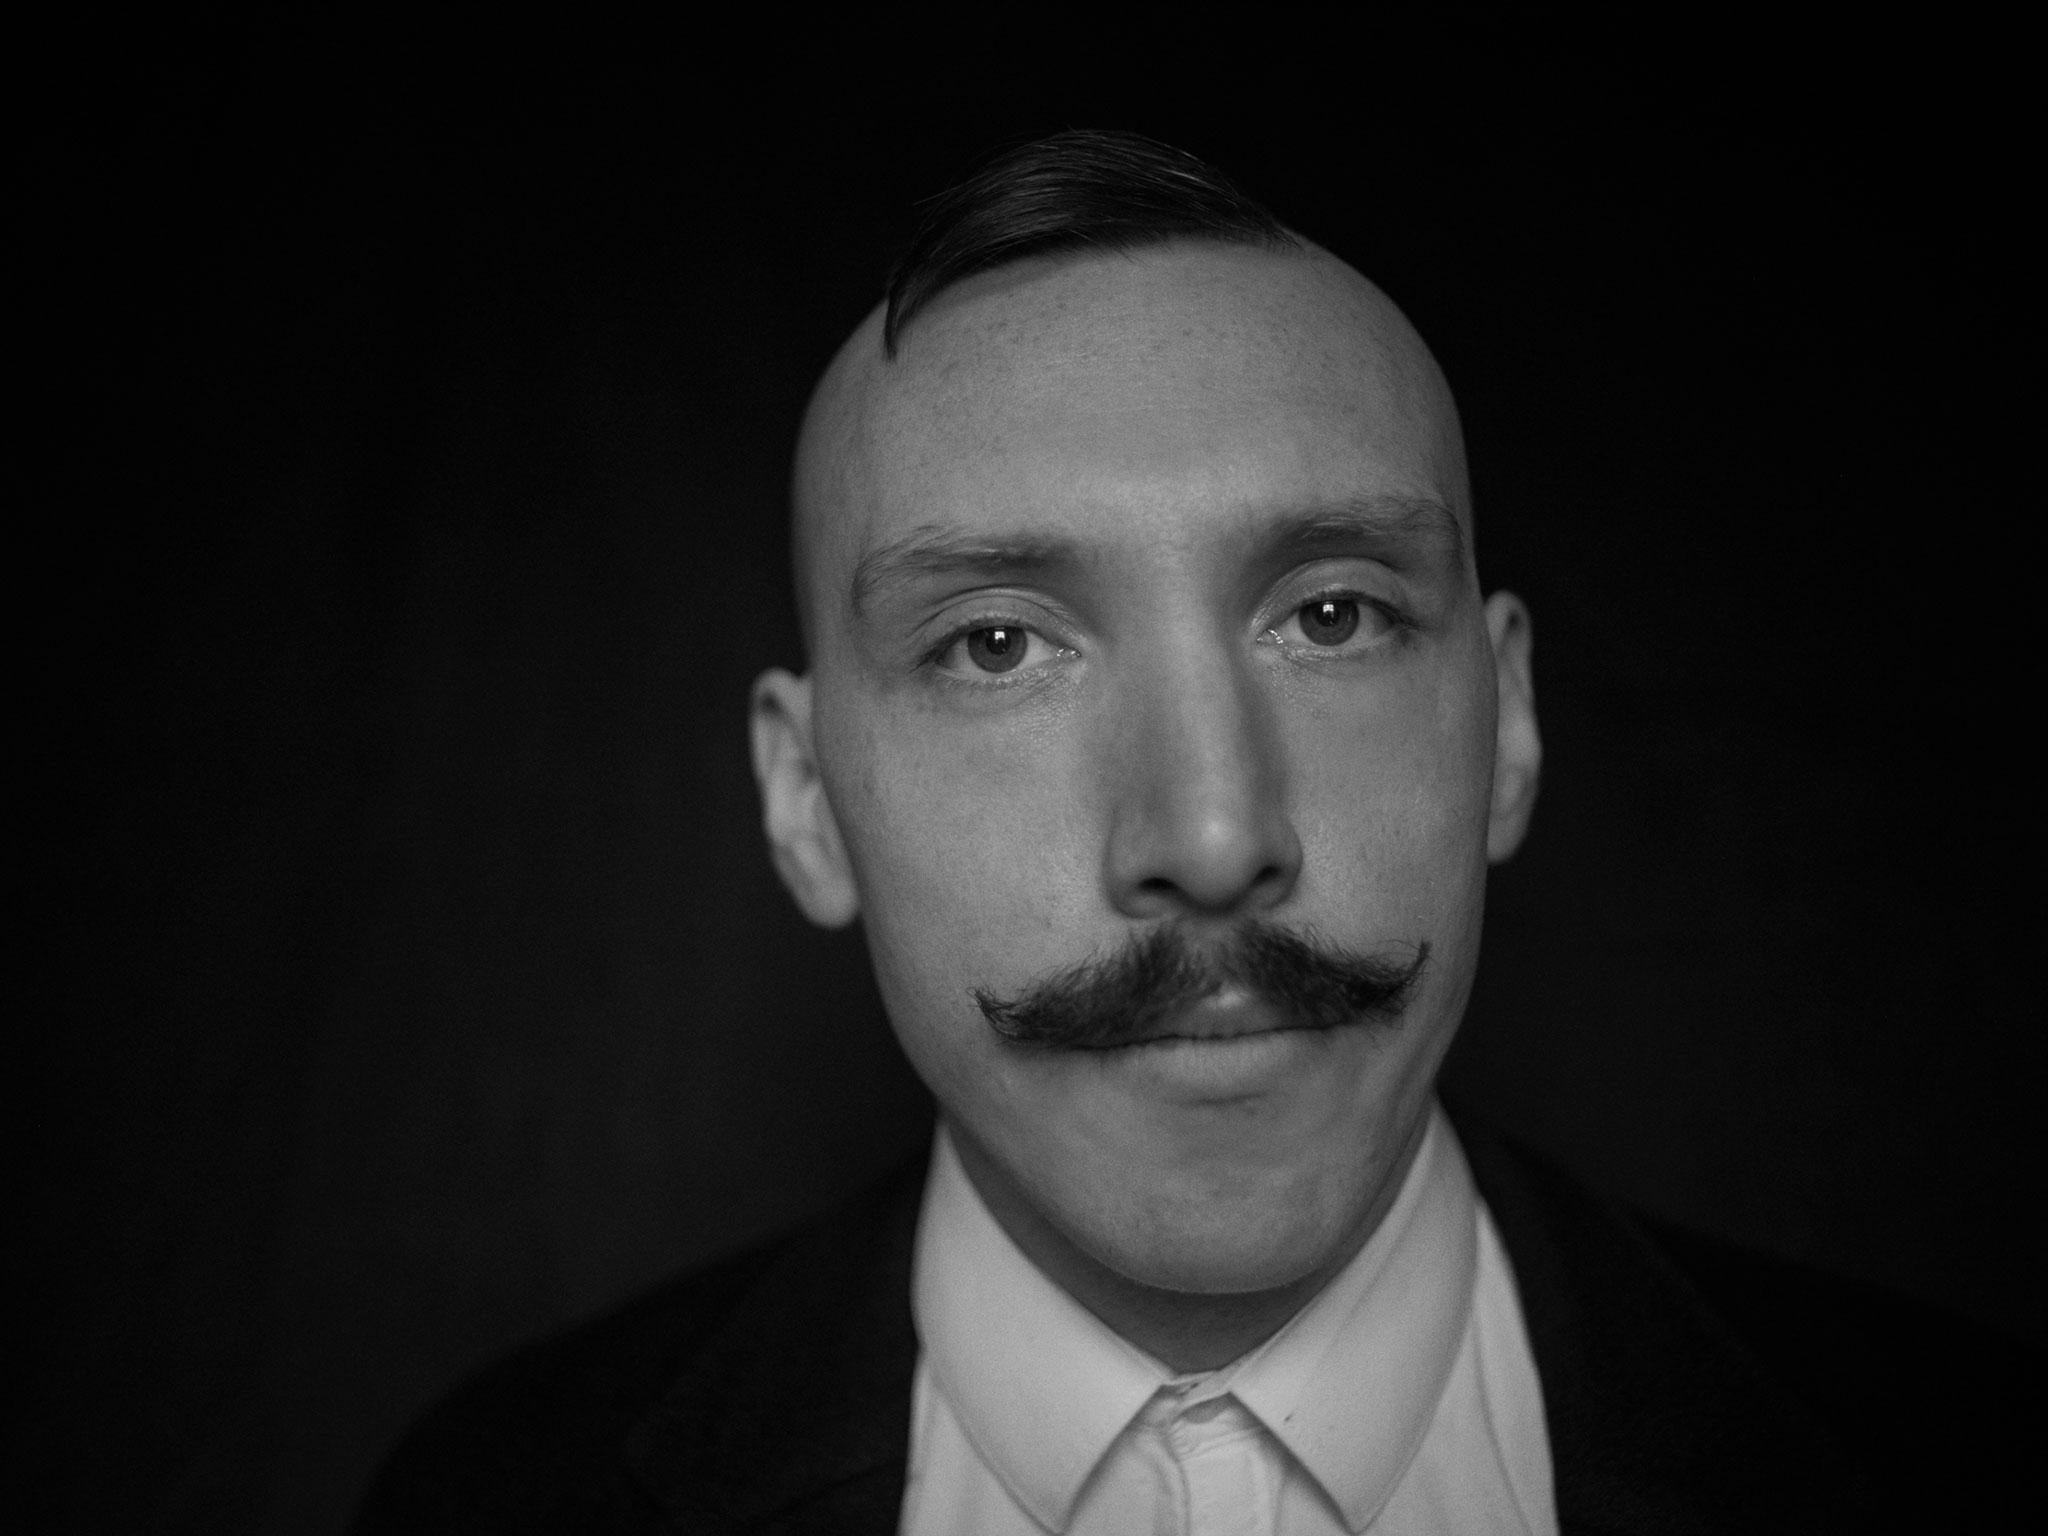 Jamie Lenman is all set to release new music in 2017